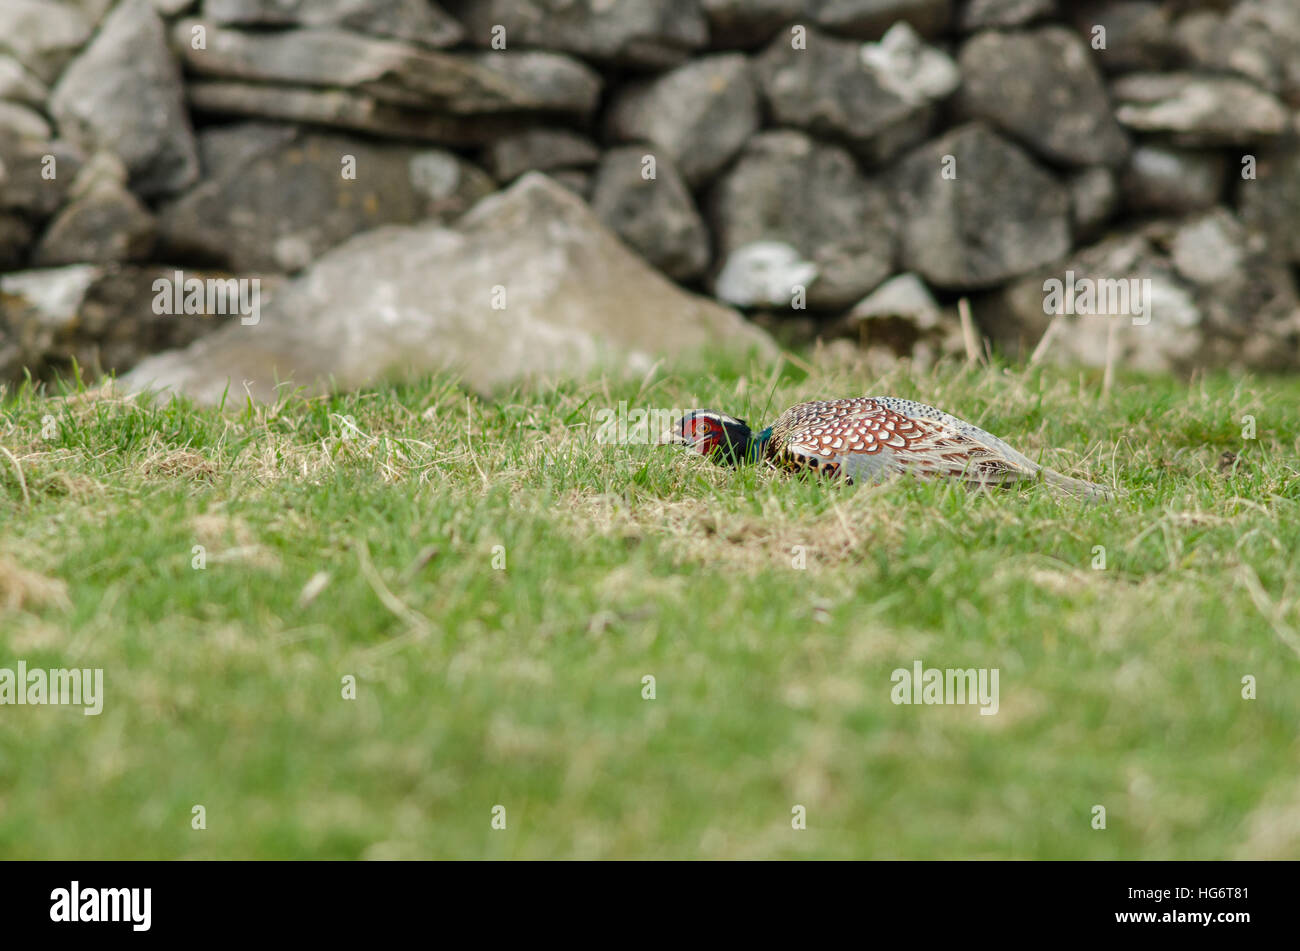 A Ring-necked Pheasant (Phasianus colchicus) hides in the grass next to a dry stone wall Stock Photo